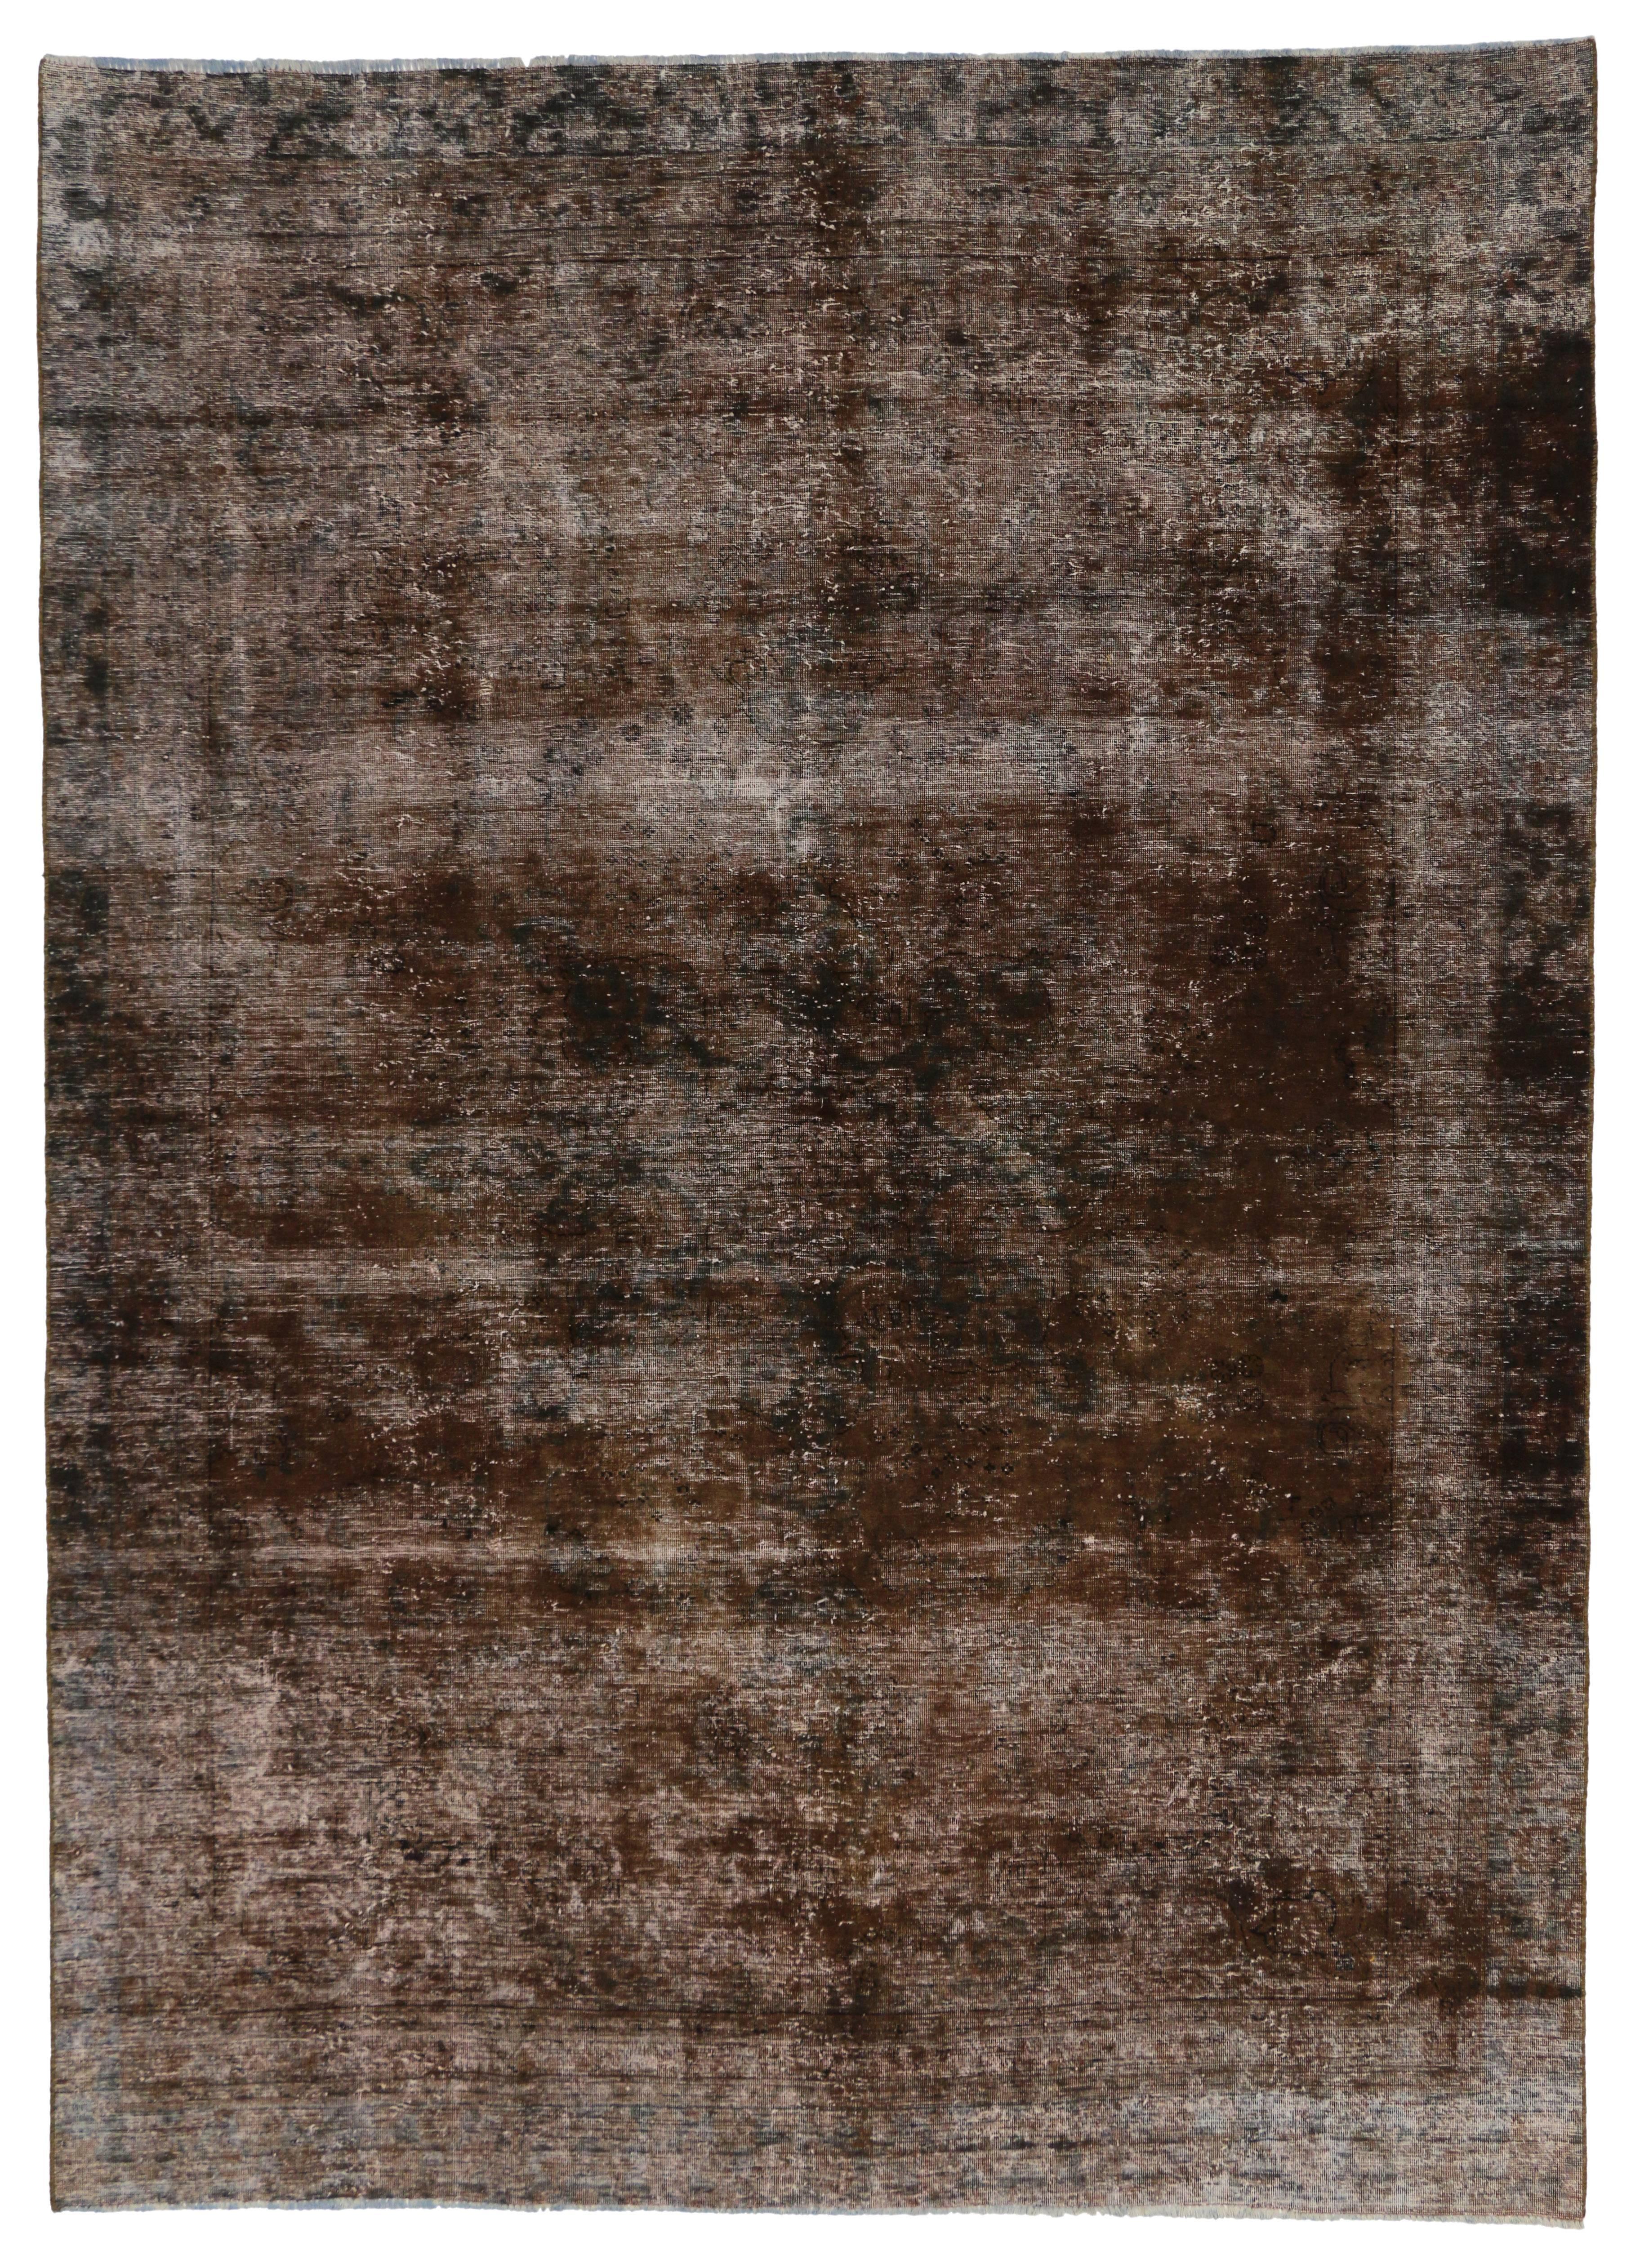 Hand-Knotted Distressed Antique Persian Overdyed Rug with Modern Rustic Industrial Style